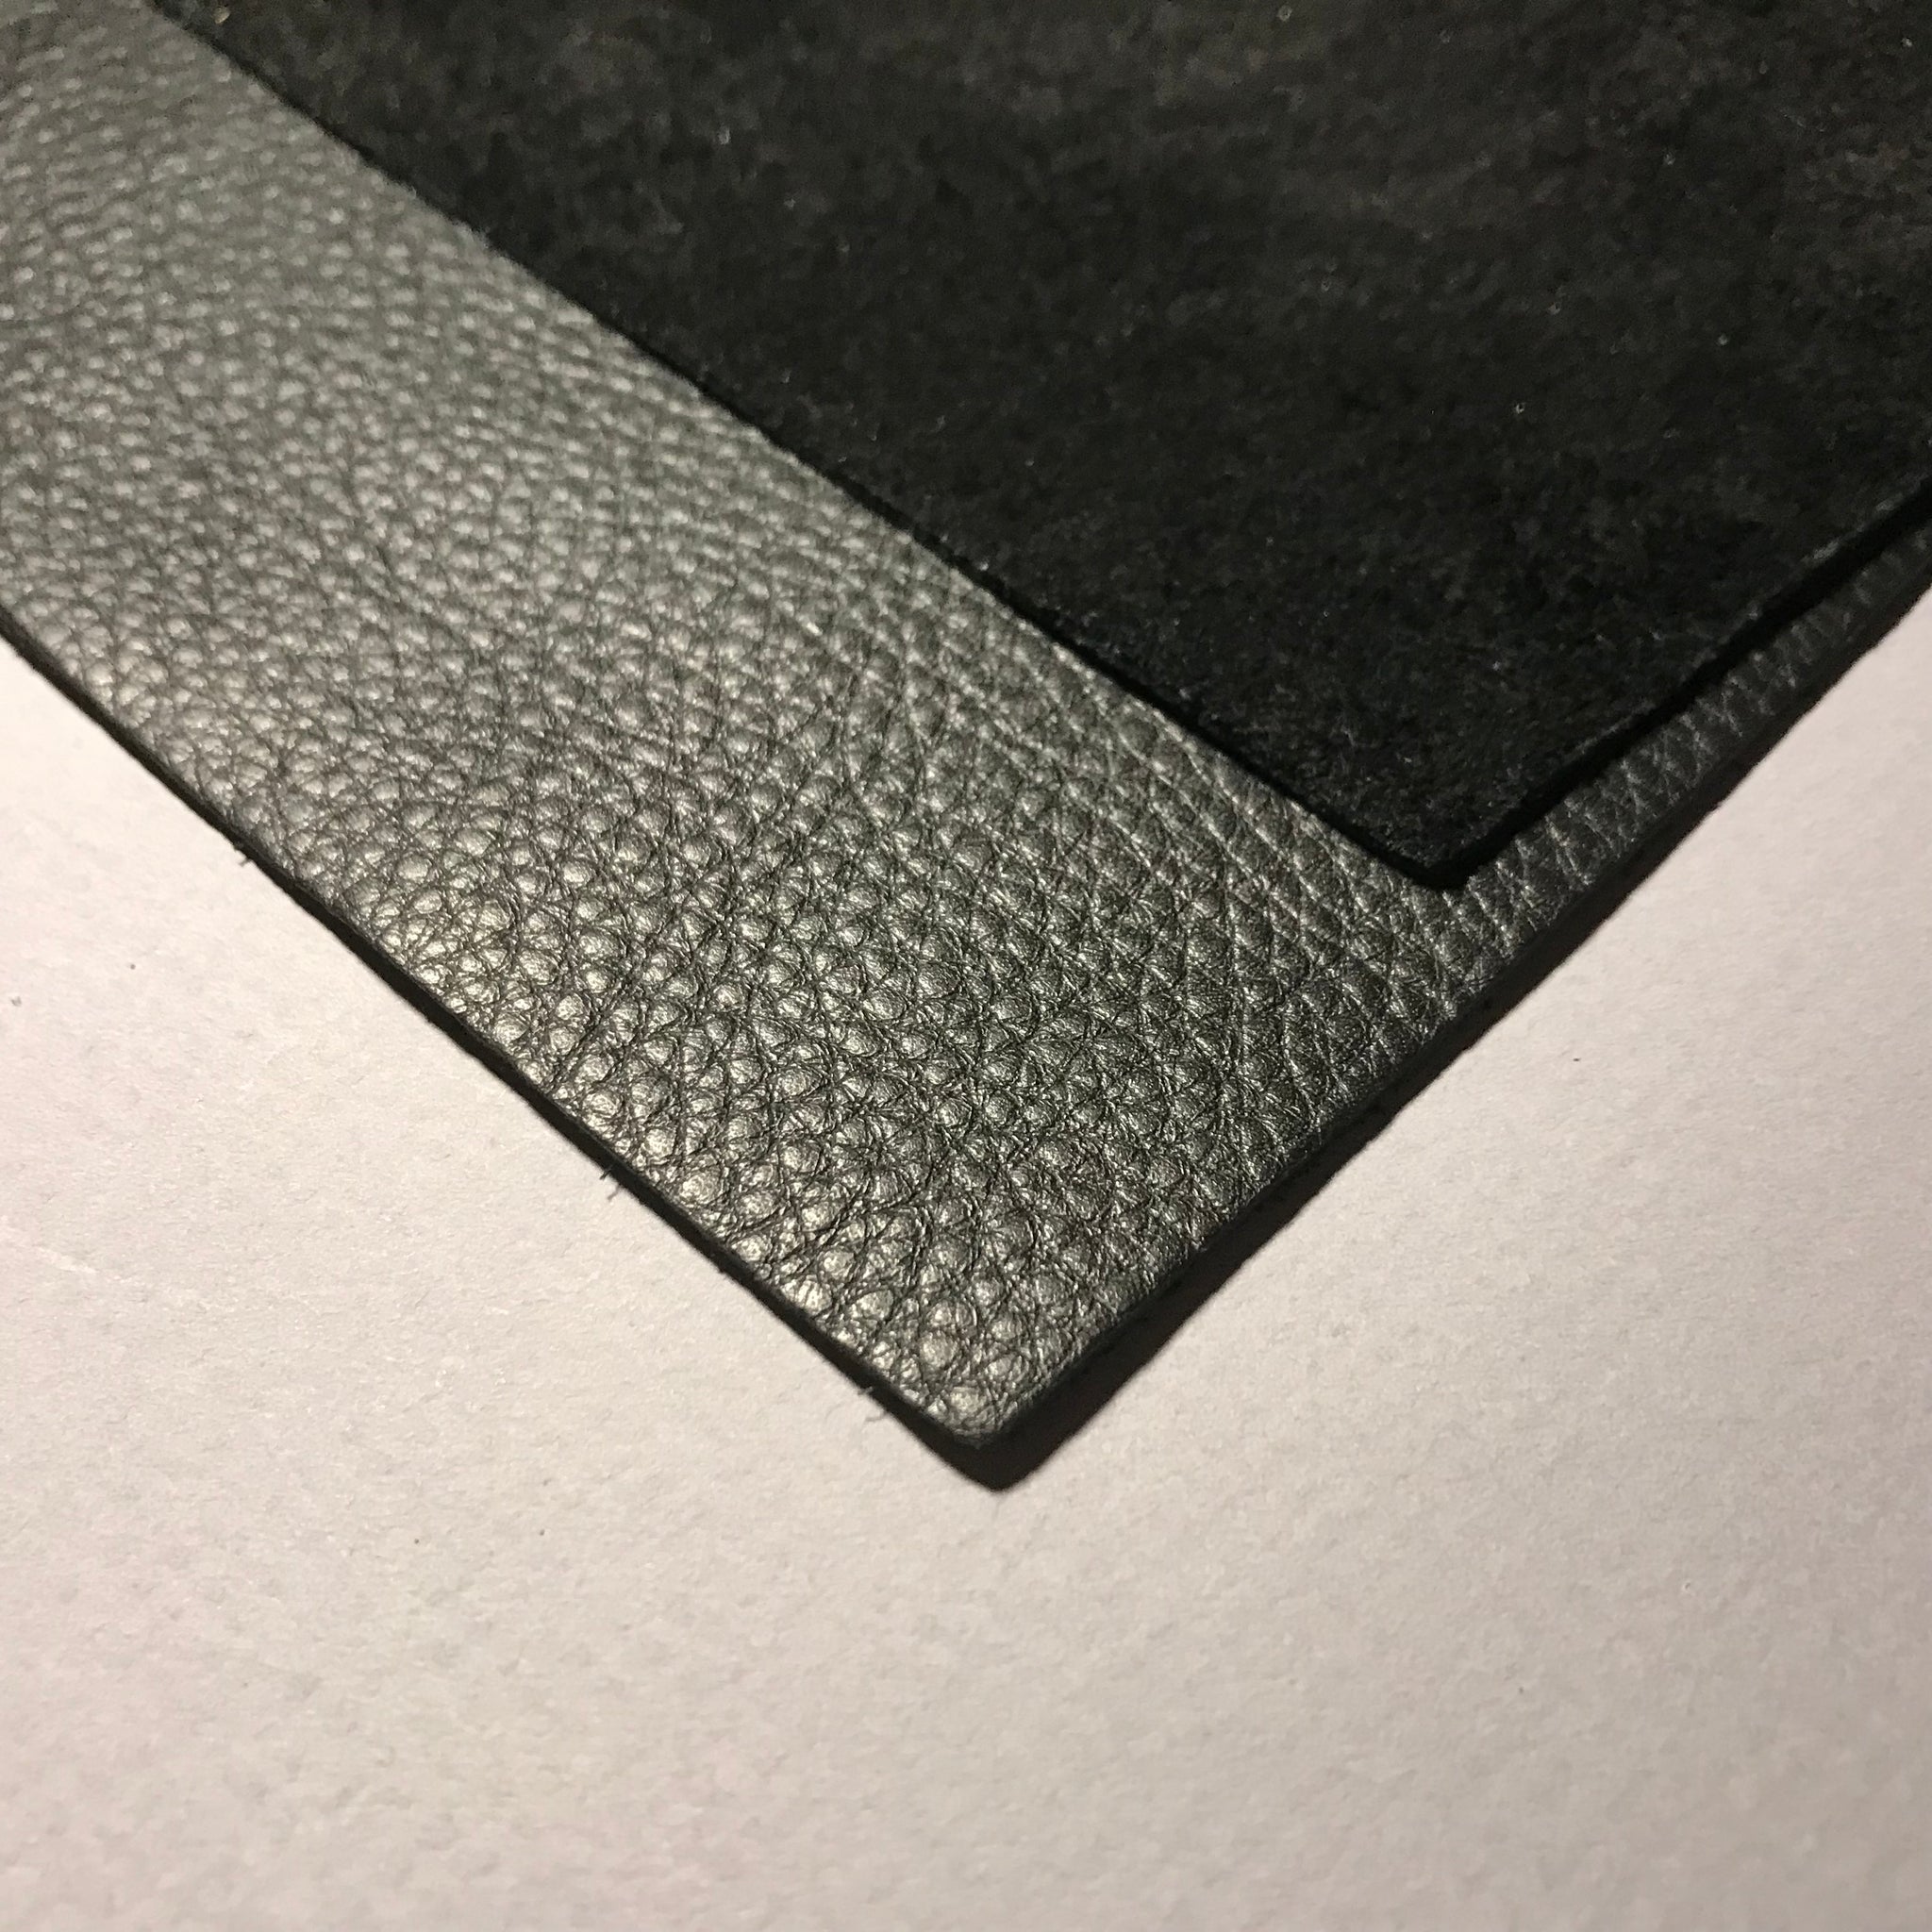 Leather (Cowhide) - Black – MakerStock